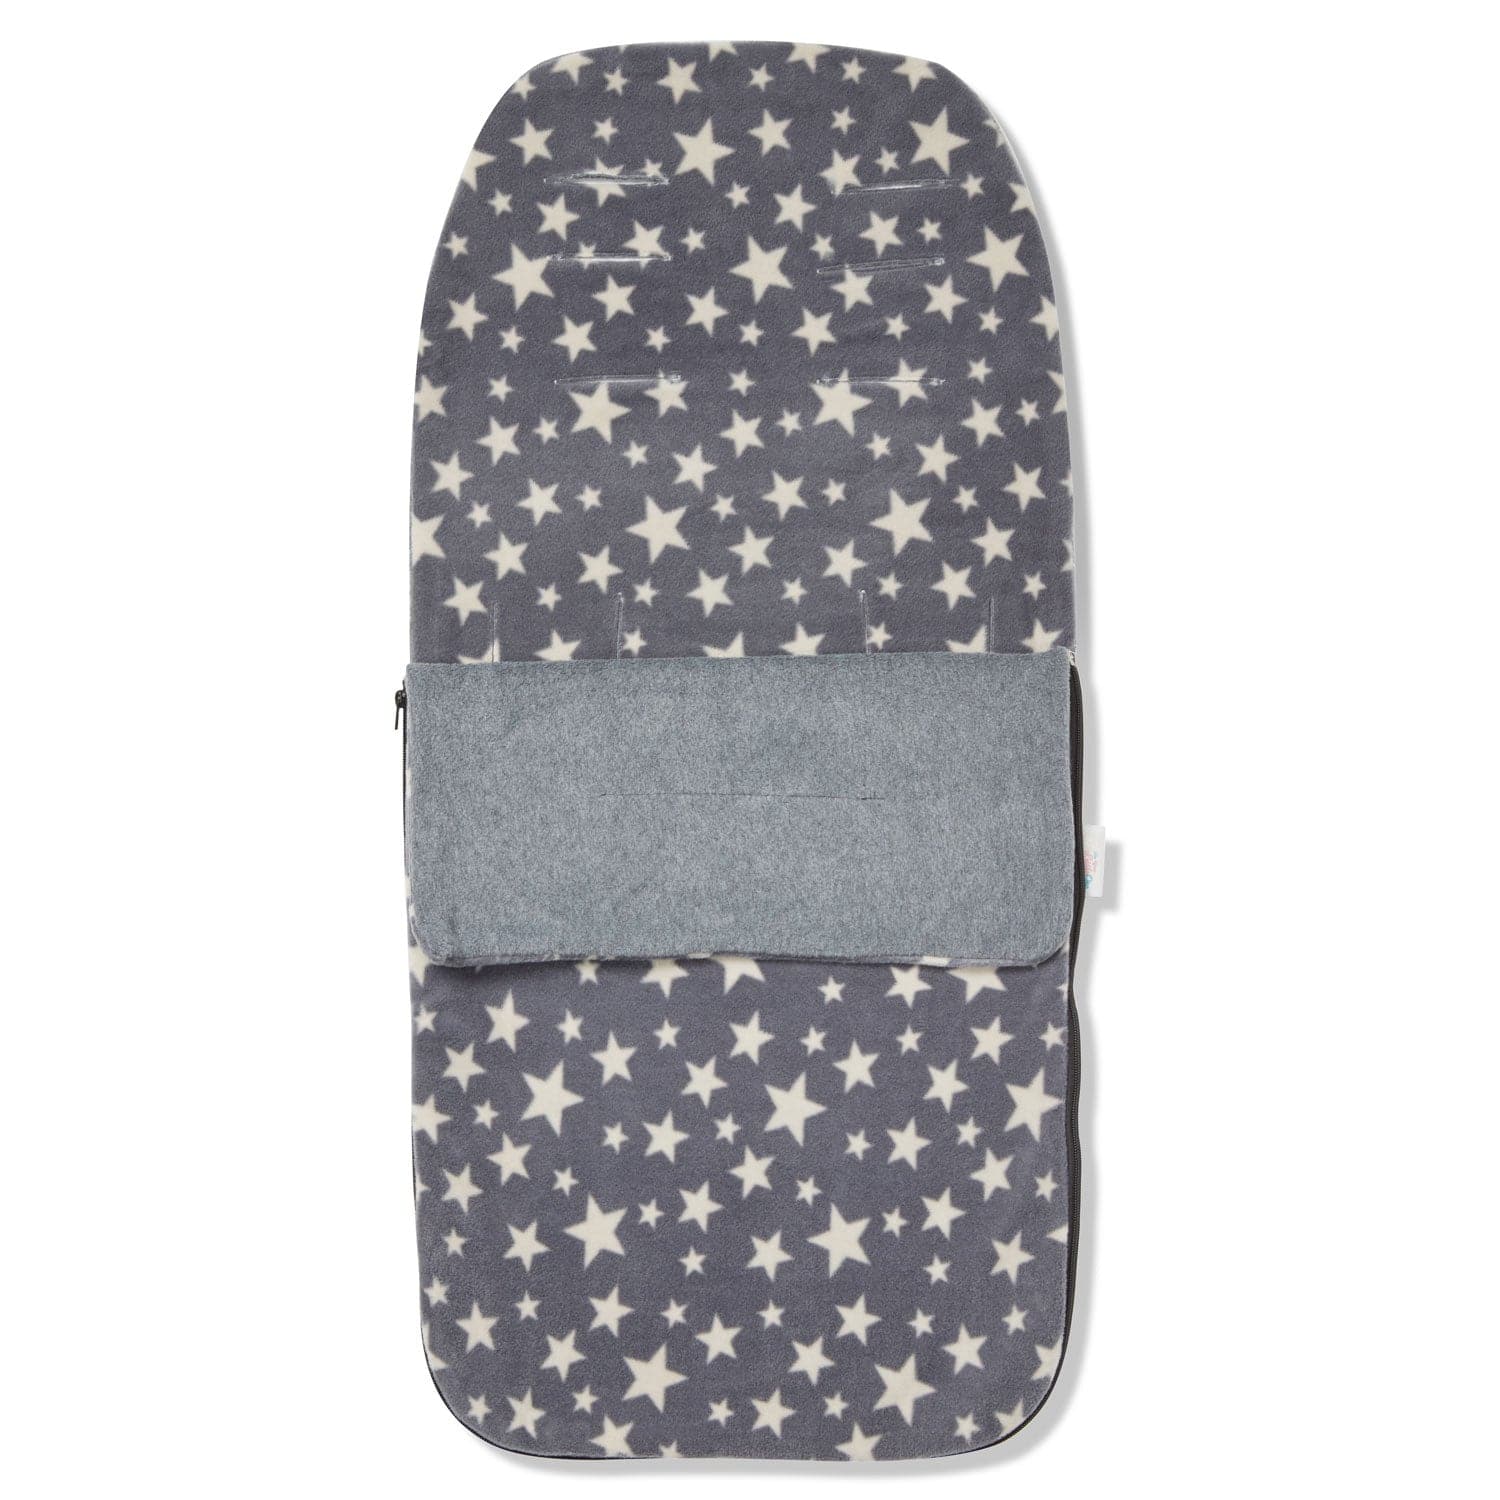 Snuggle Summer Footmuff Compatible with ABC Design - Grey with Cream Stars / Fits All Models | For Your Little One